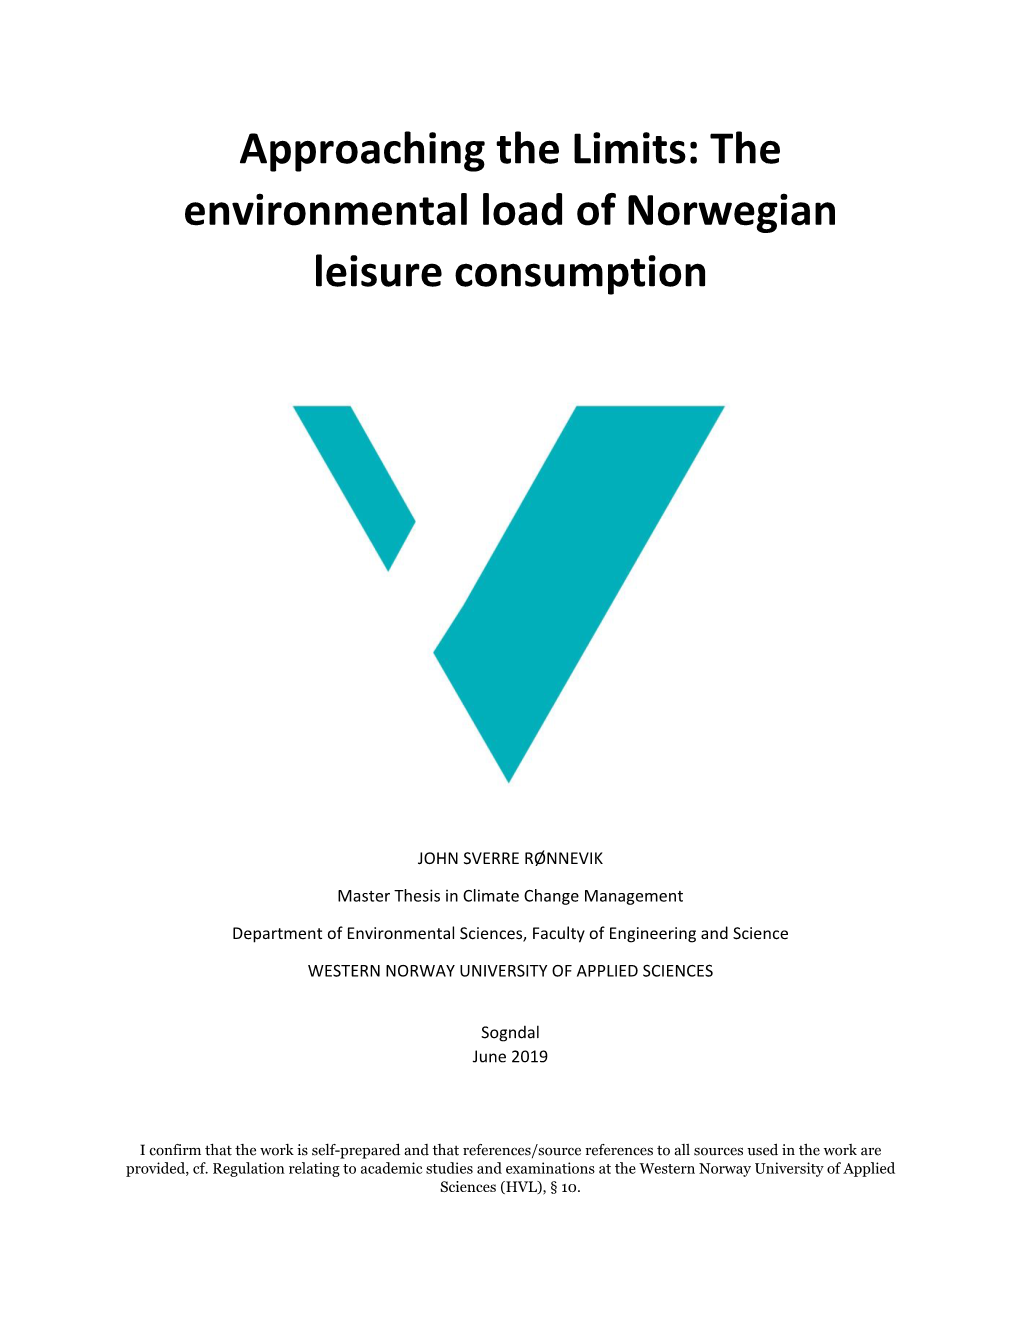 The Environmental Load of Norwegian Leisure Consumption